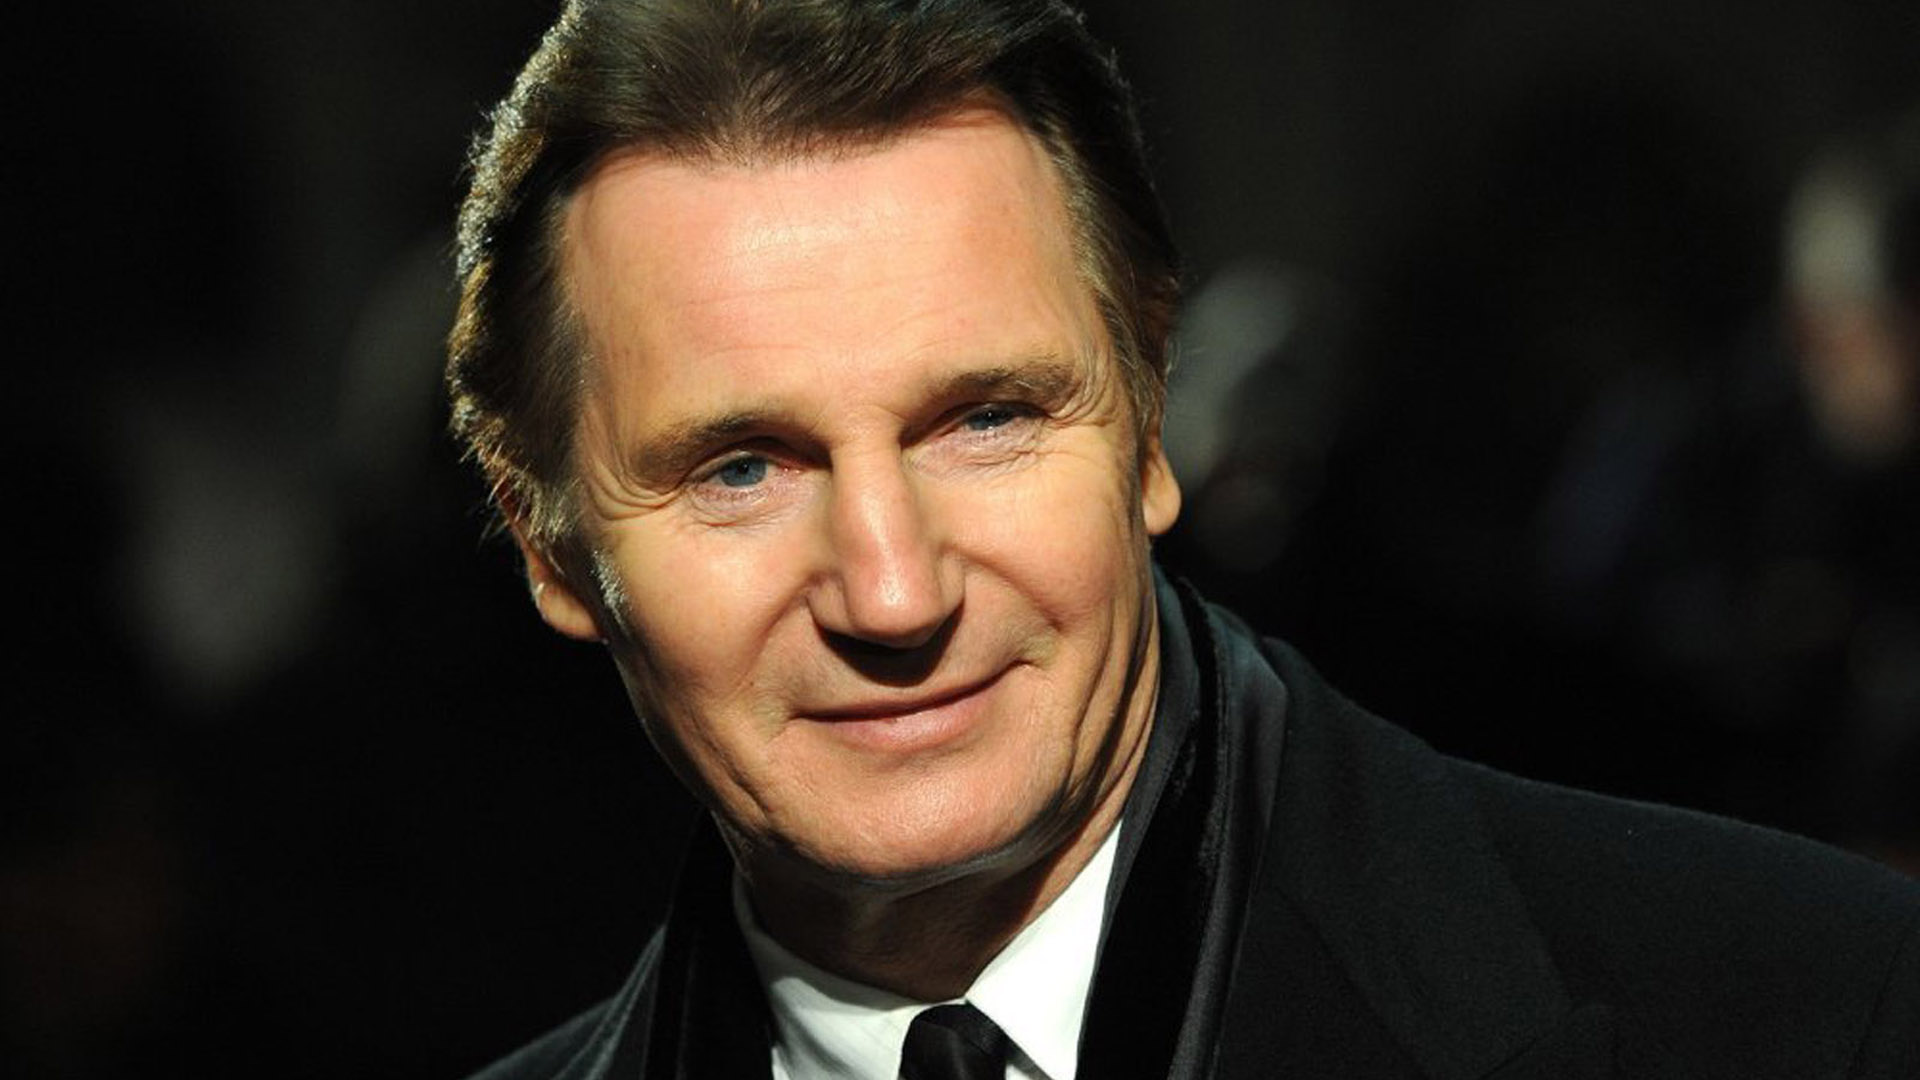 Liam Neeson Royal Film Performance 2010: The Chronicles Of Narnia: The Voyage Of The Dawn Treader held at the Odeon and Empire Cinemas on Leicester Square. London, England - 30.11.10 Credit: (Mandatory): WENN.com